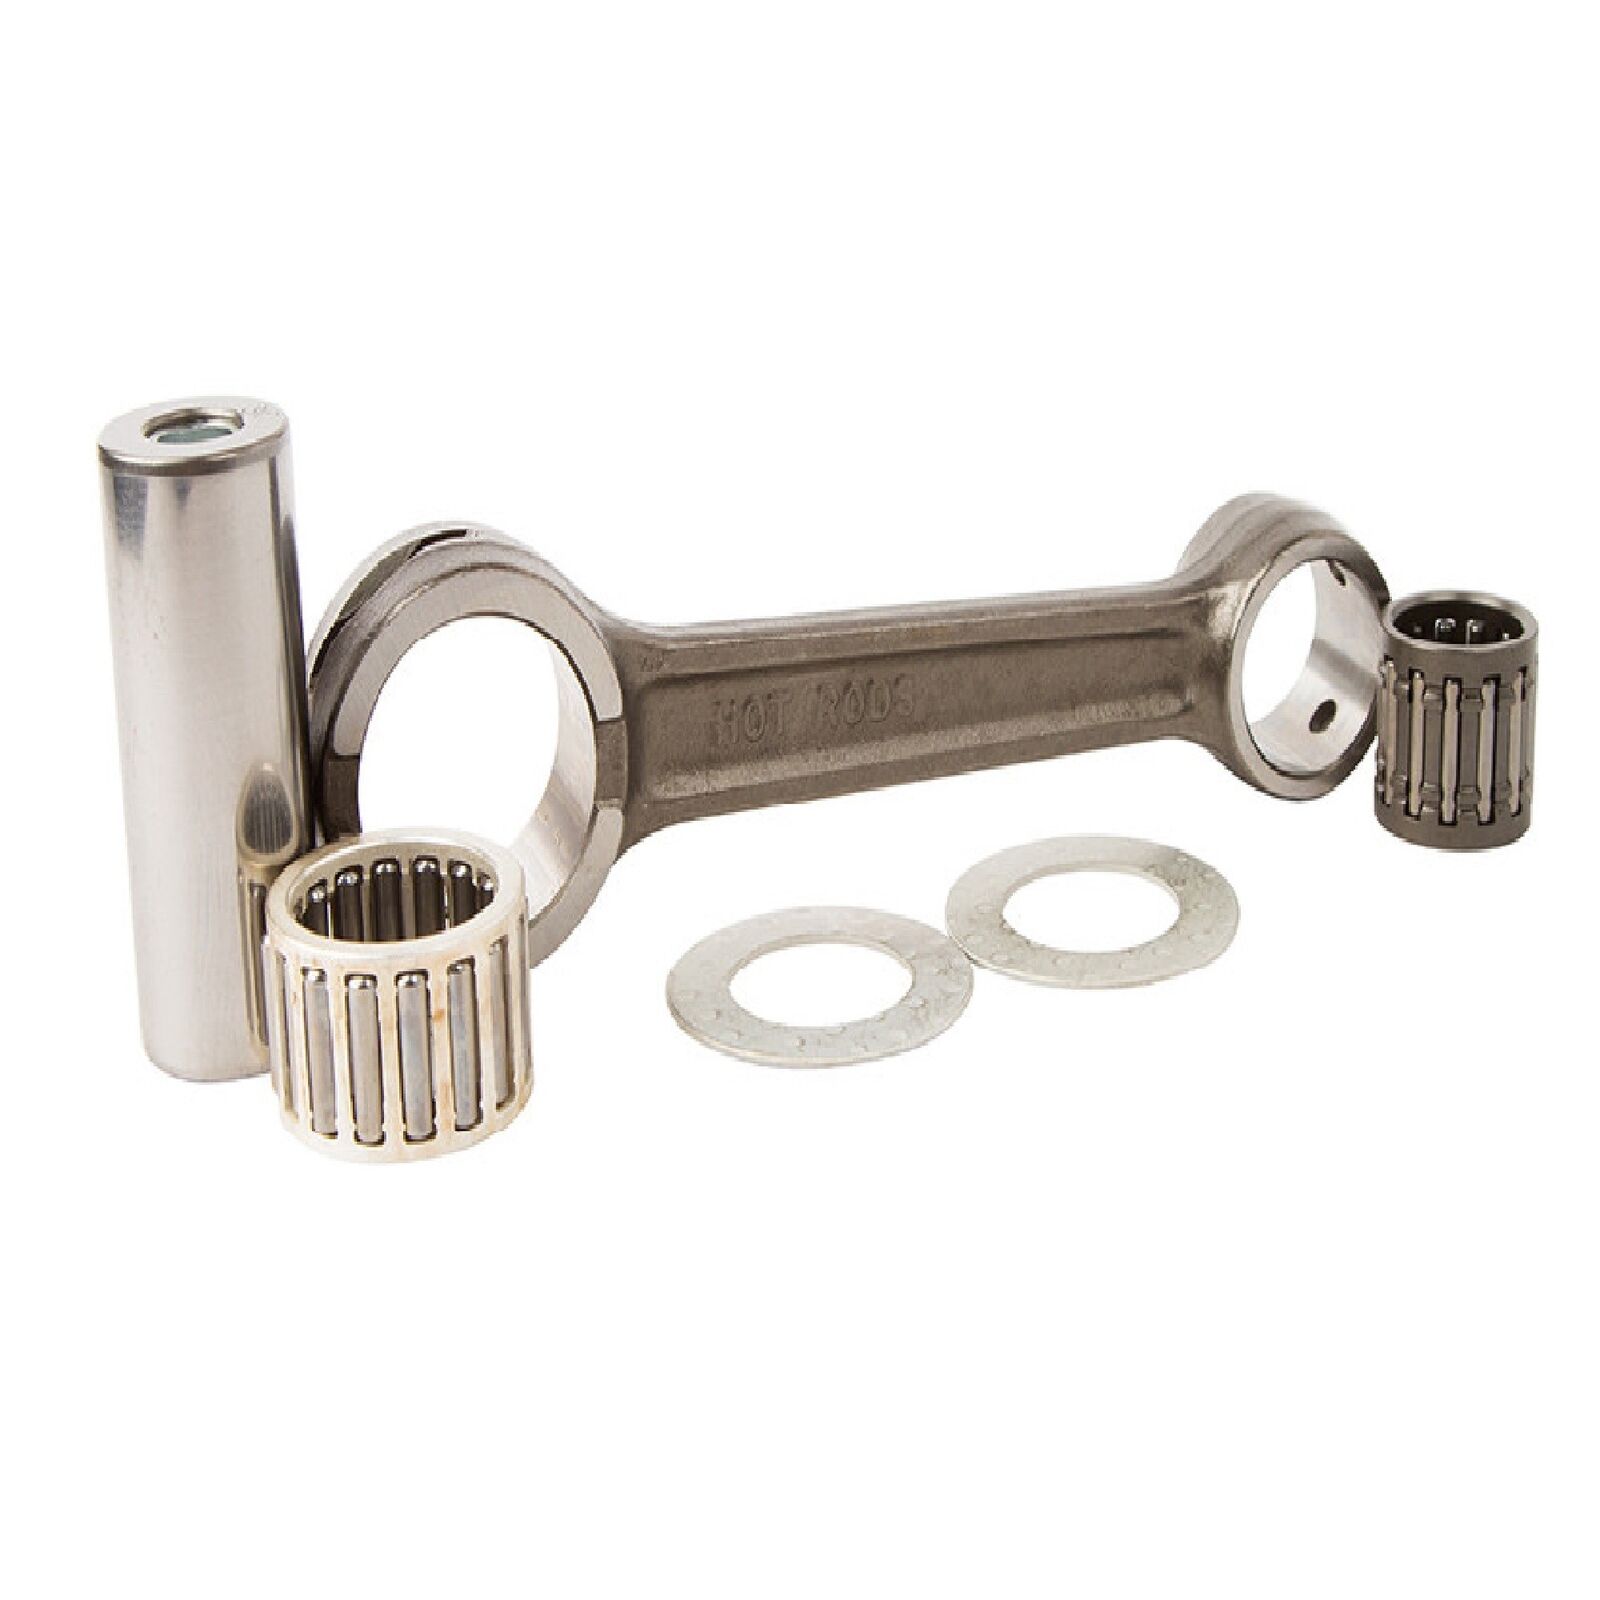 New Hot Rods Connecting Rod For Suzuki RM 250 (03-08) 8611